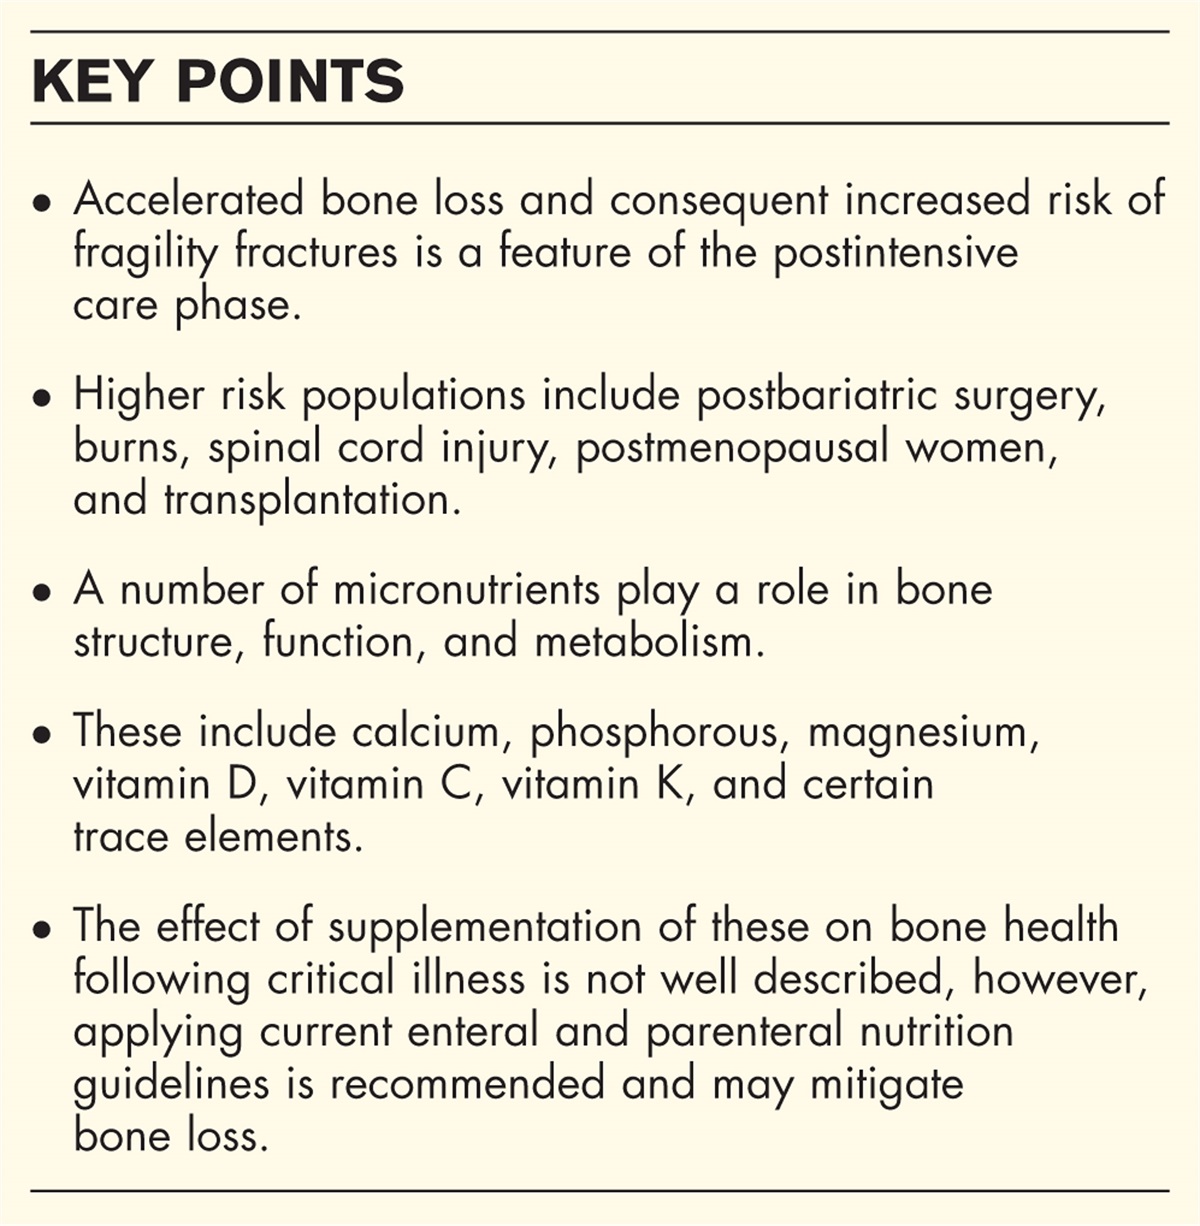 Micronutrient intake to protect against osteoporosis during and after critical illness